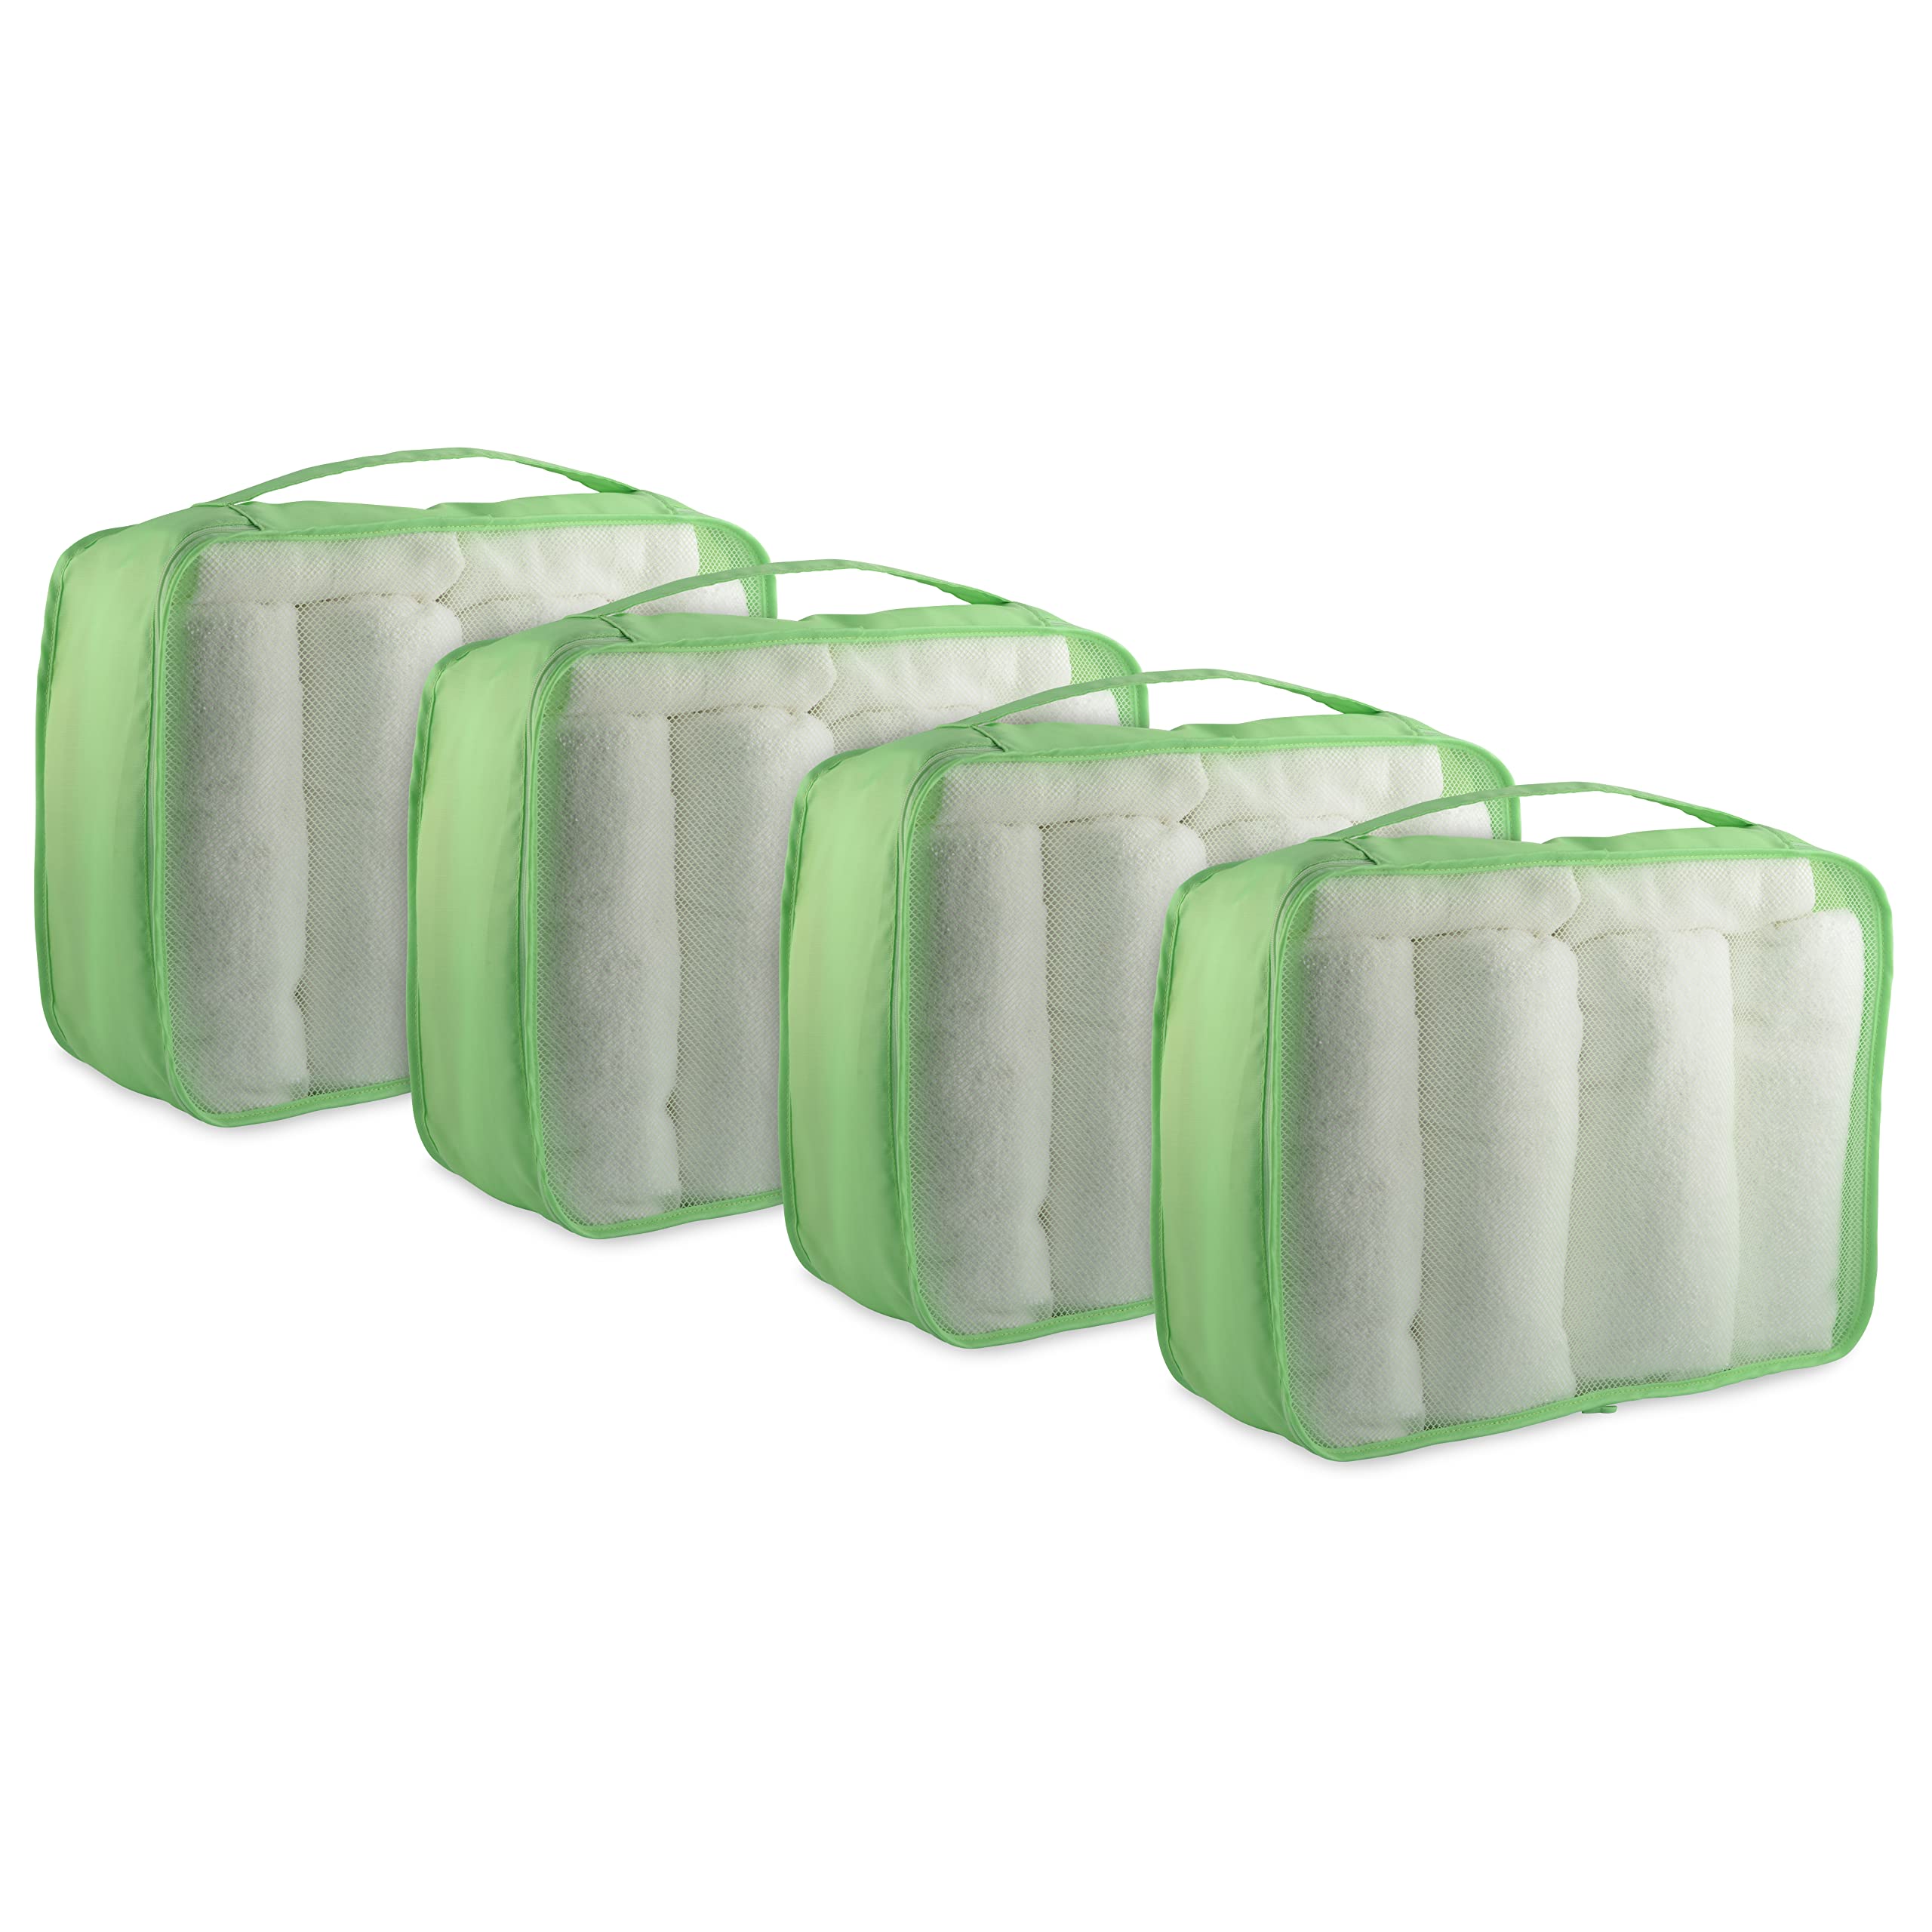 Large Packing Cubes - 4 Set Mesh Green Packing Cubes for Travel, Luggage Organizer Bags, Travel Essentials, Vacation Must Haves for Accessories, Suitcase Storage, Clothes, Shoes, Laundry 17.5x4x12.75  - Like New